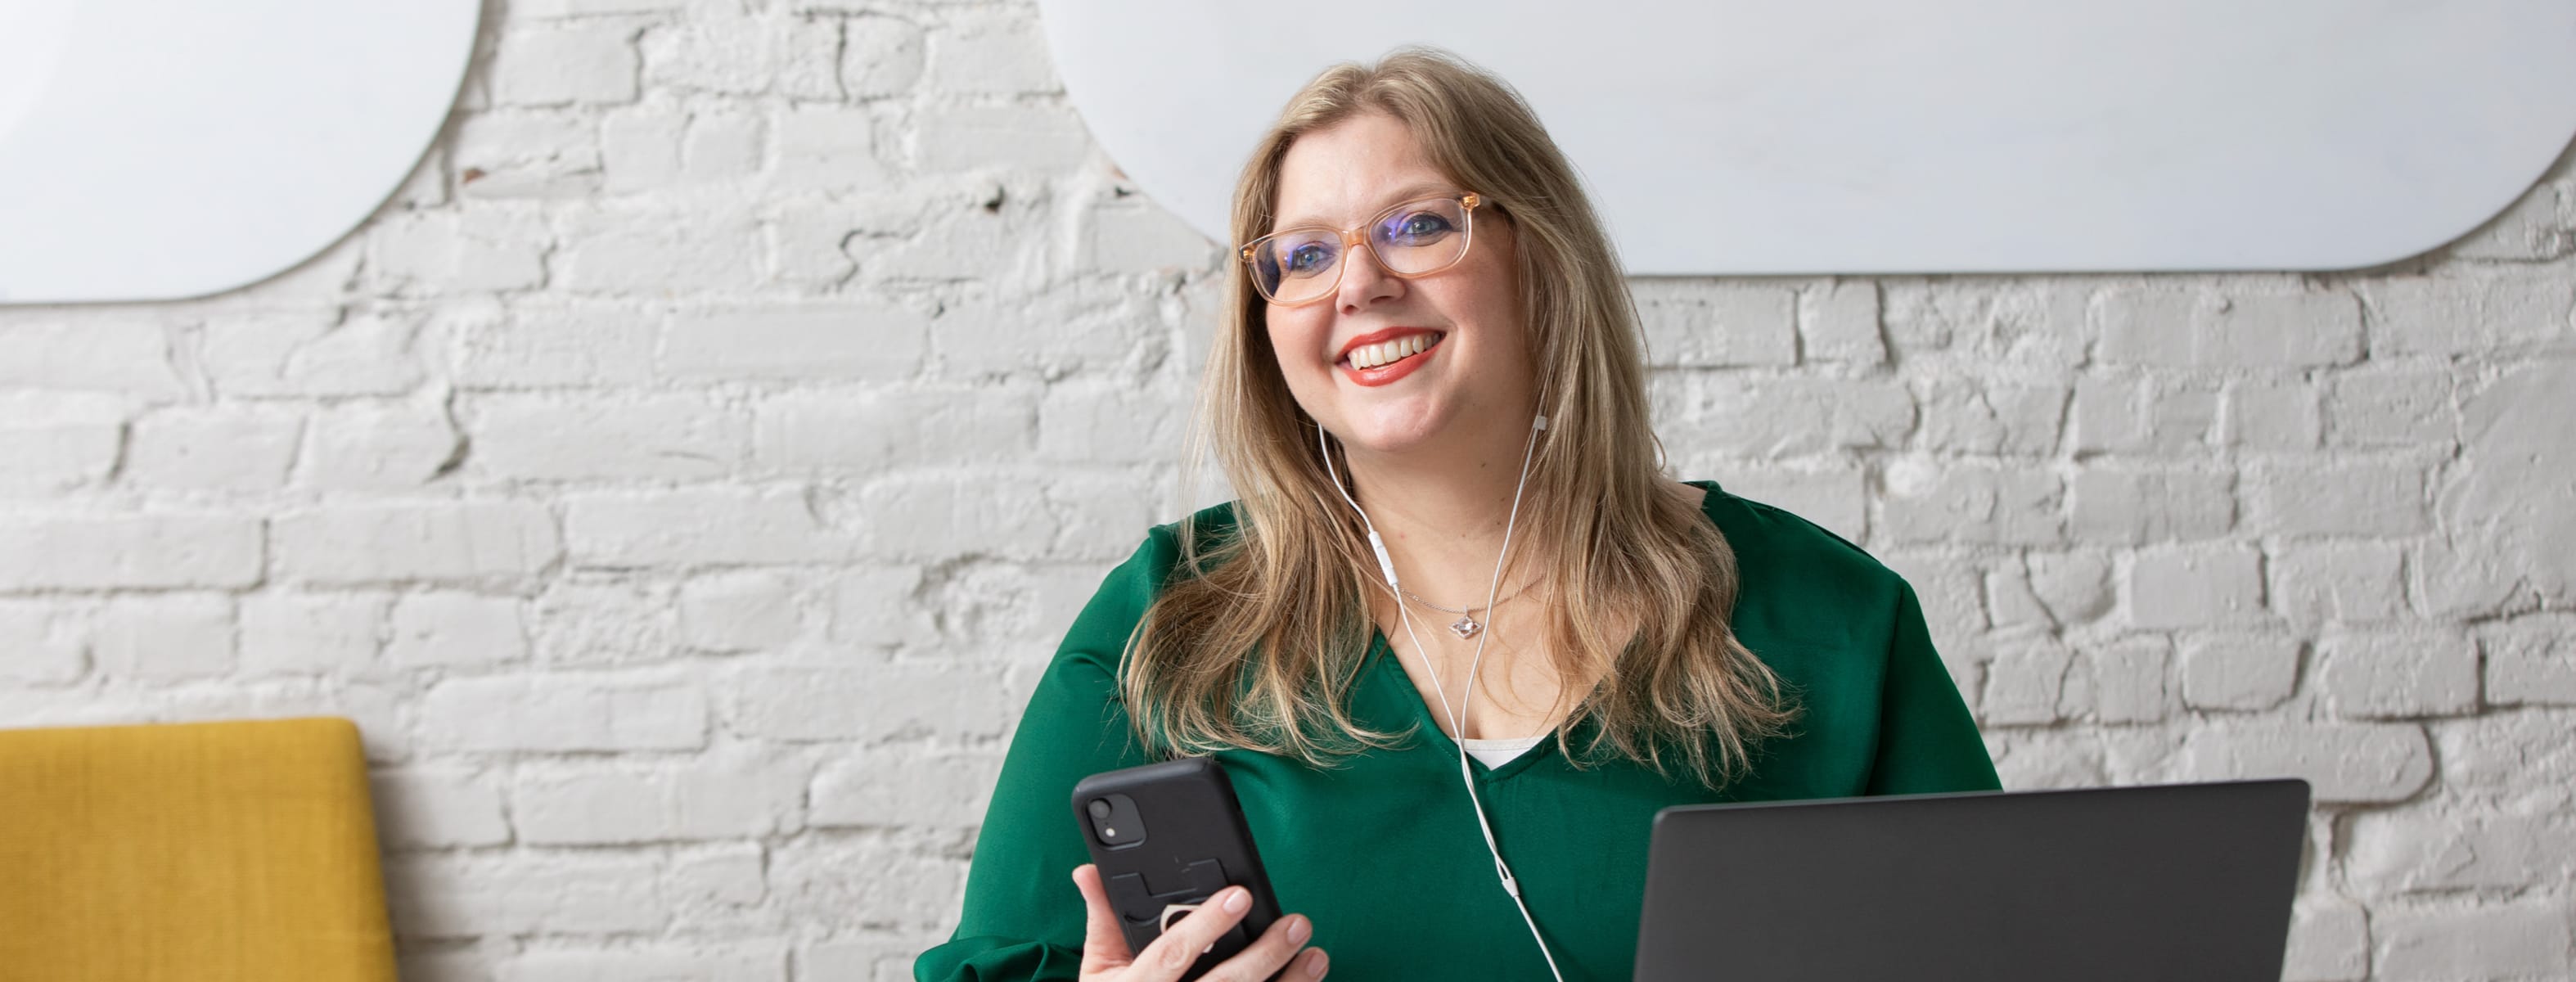 A woman in a green outfit with long hair smiling while holding a phone next to a laptop.